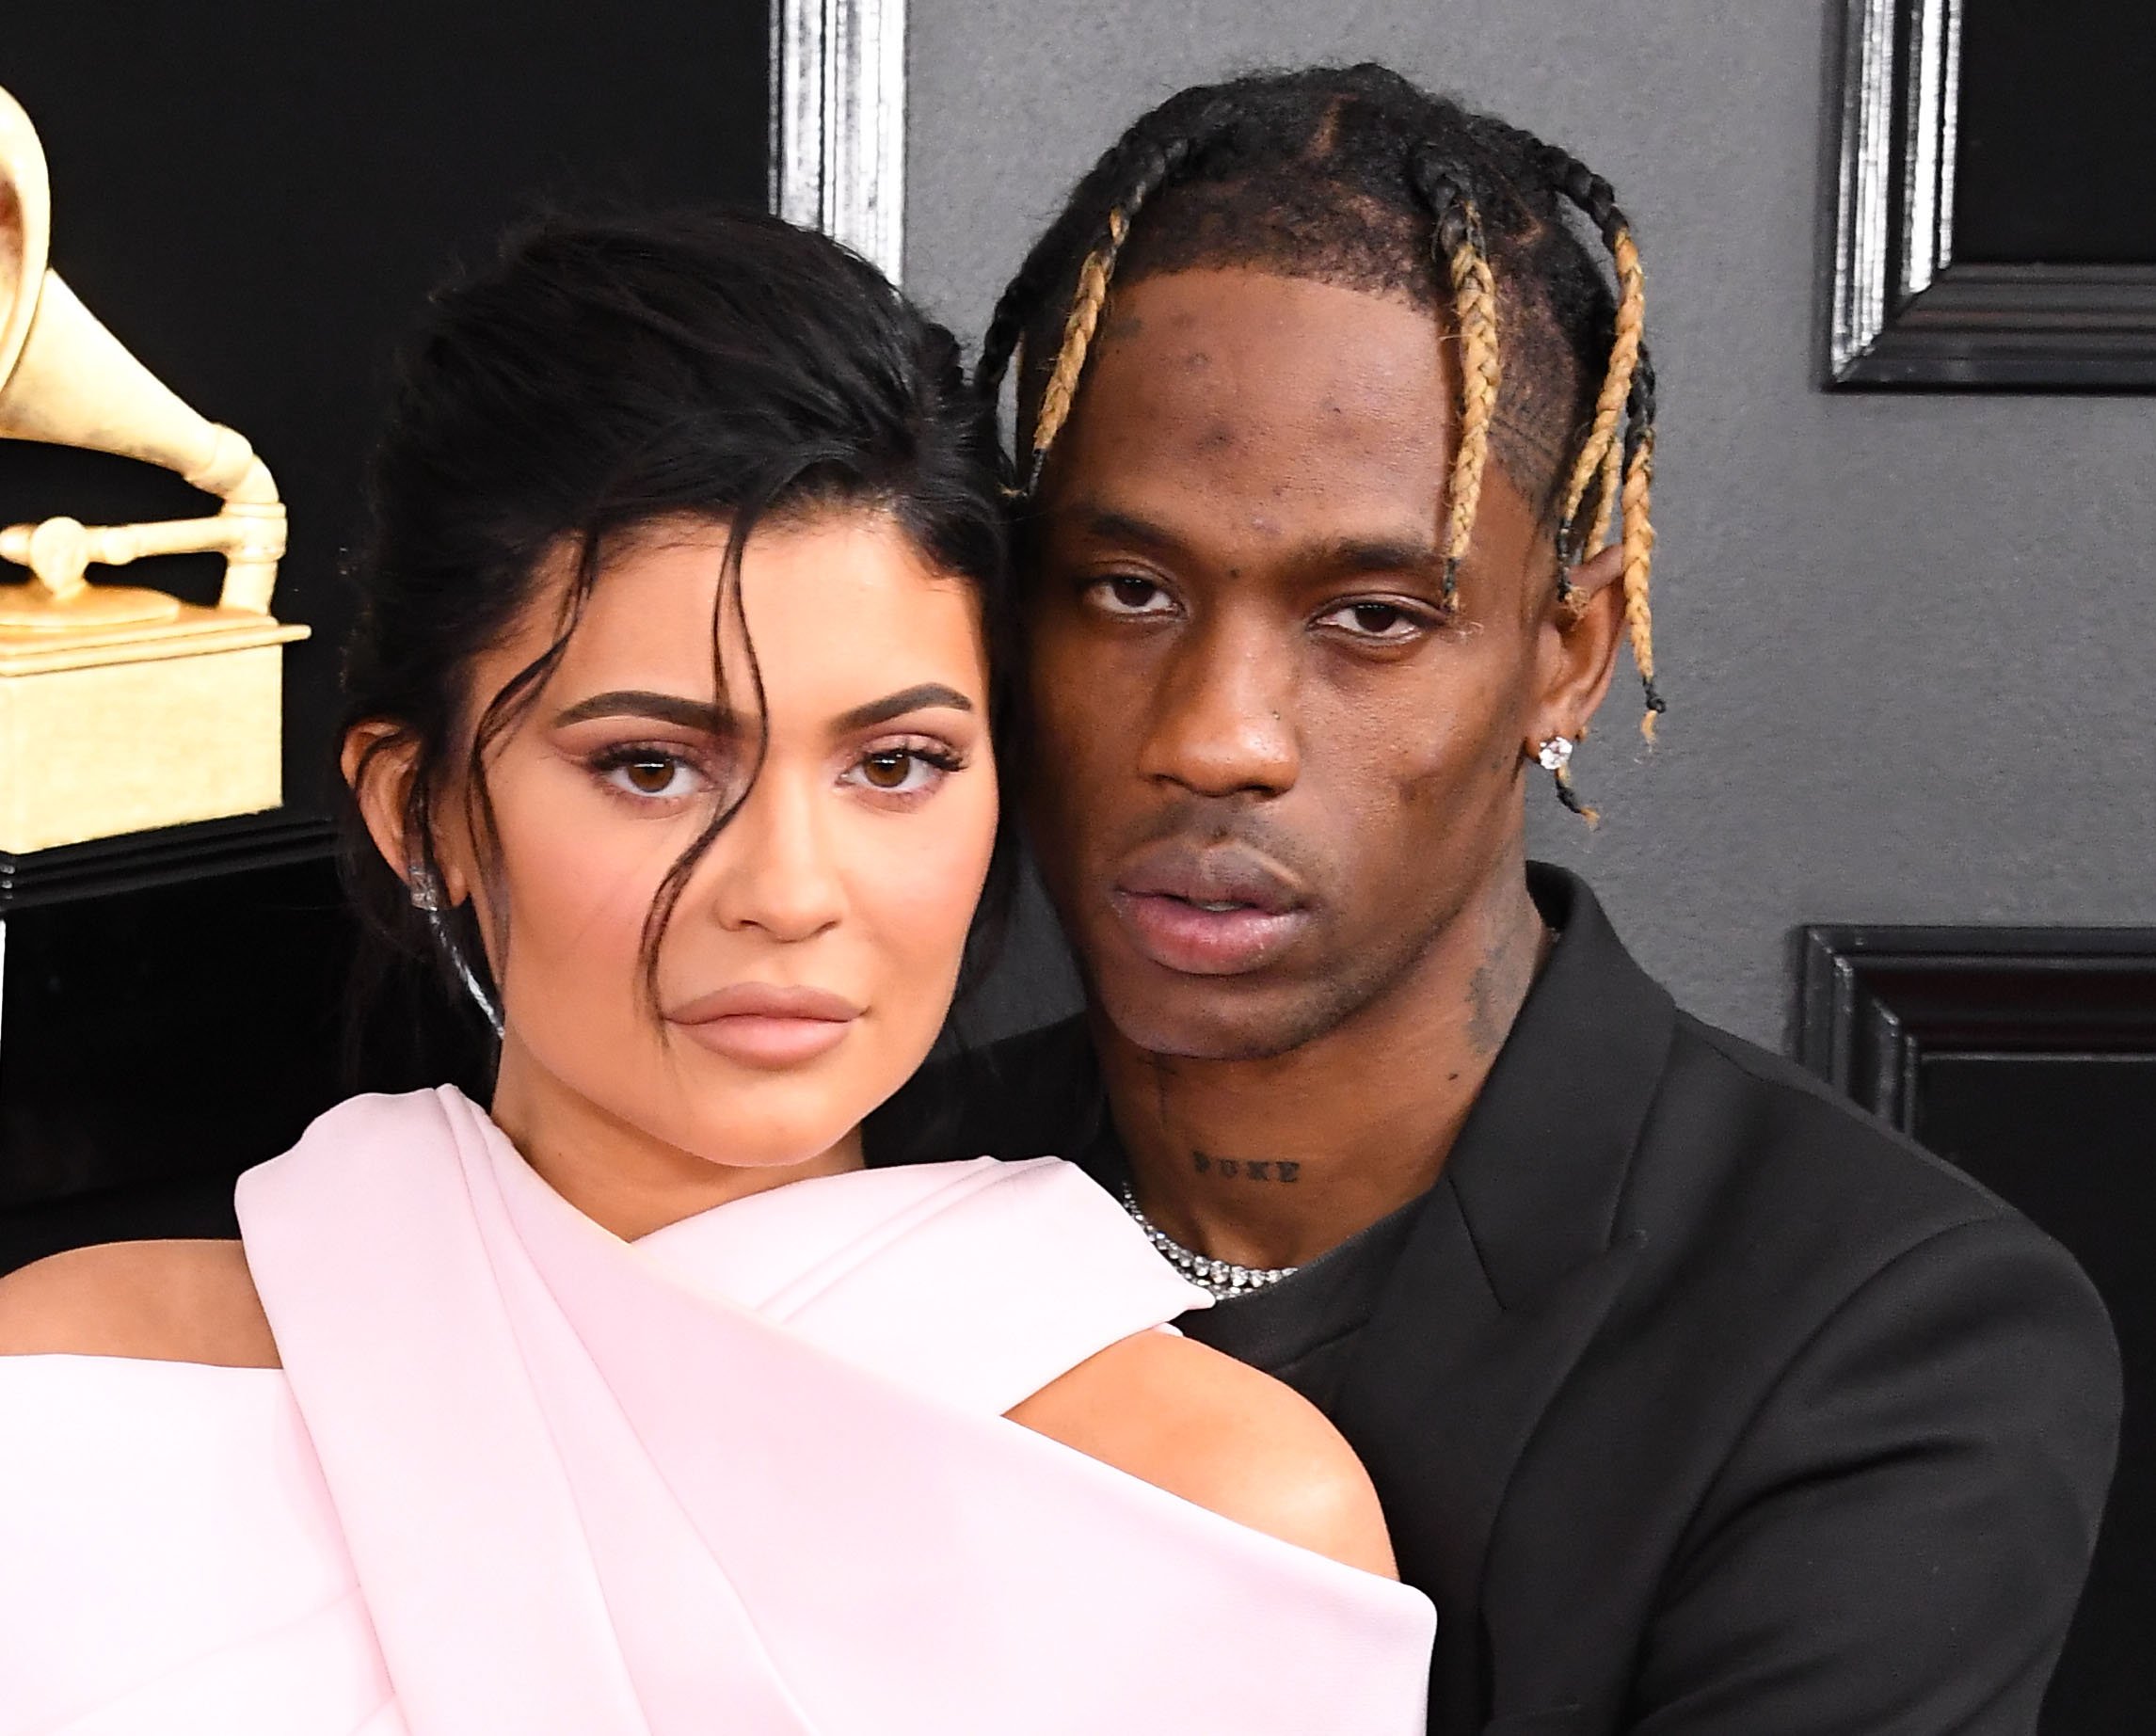 Travis Scott and Kylie Jenner posing for a picture at the GRAMMY awards